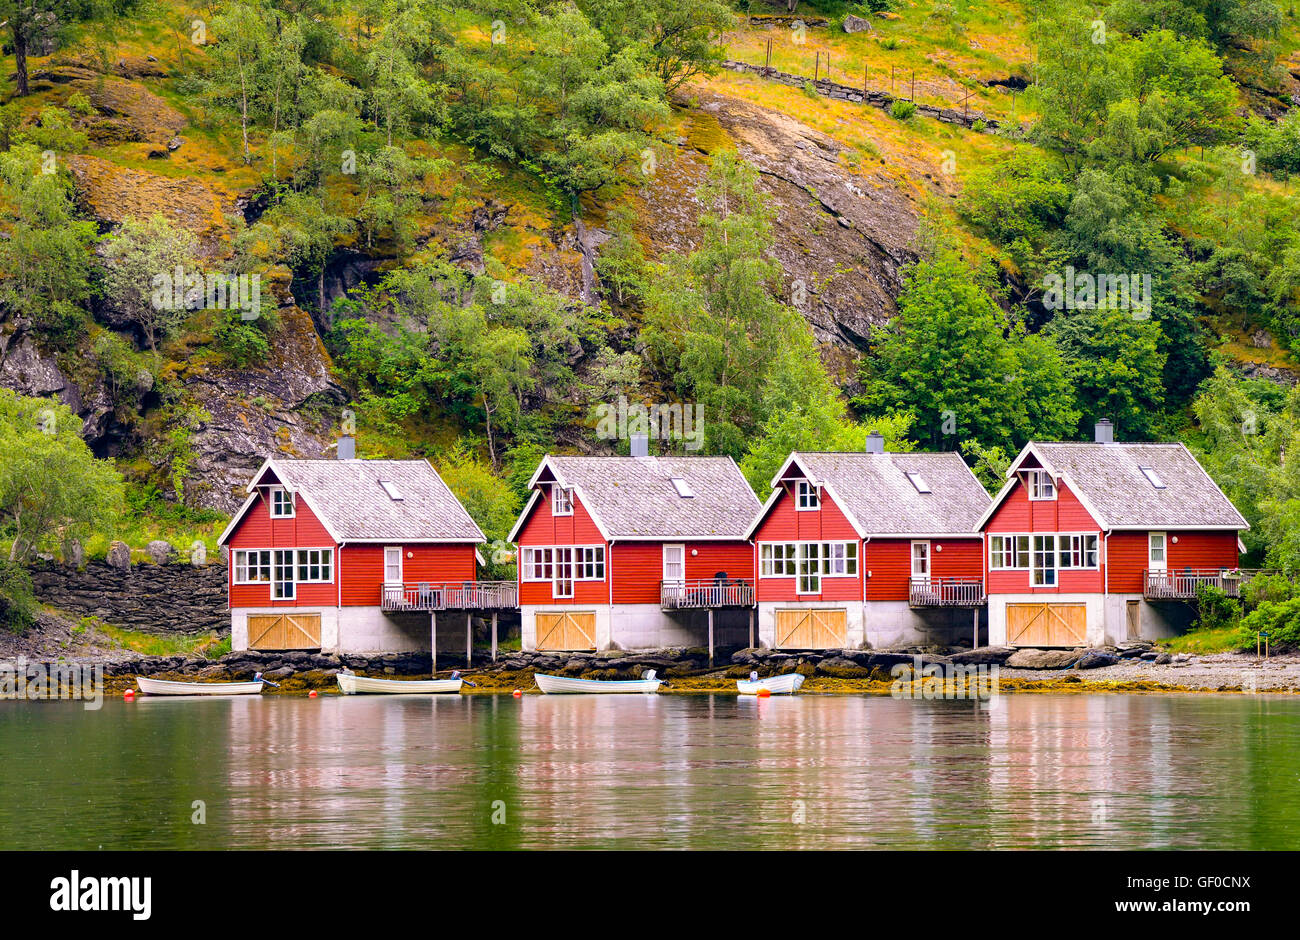 Fishermans huts and boats reflecting in Flam Harbour and Marina surrounded by mountain forest. Flam, Norway Stock Photo